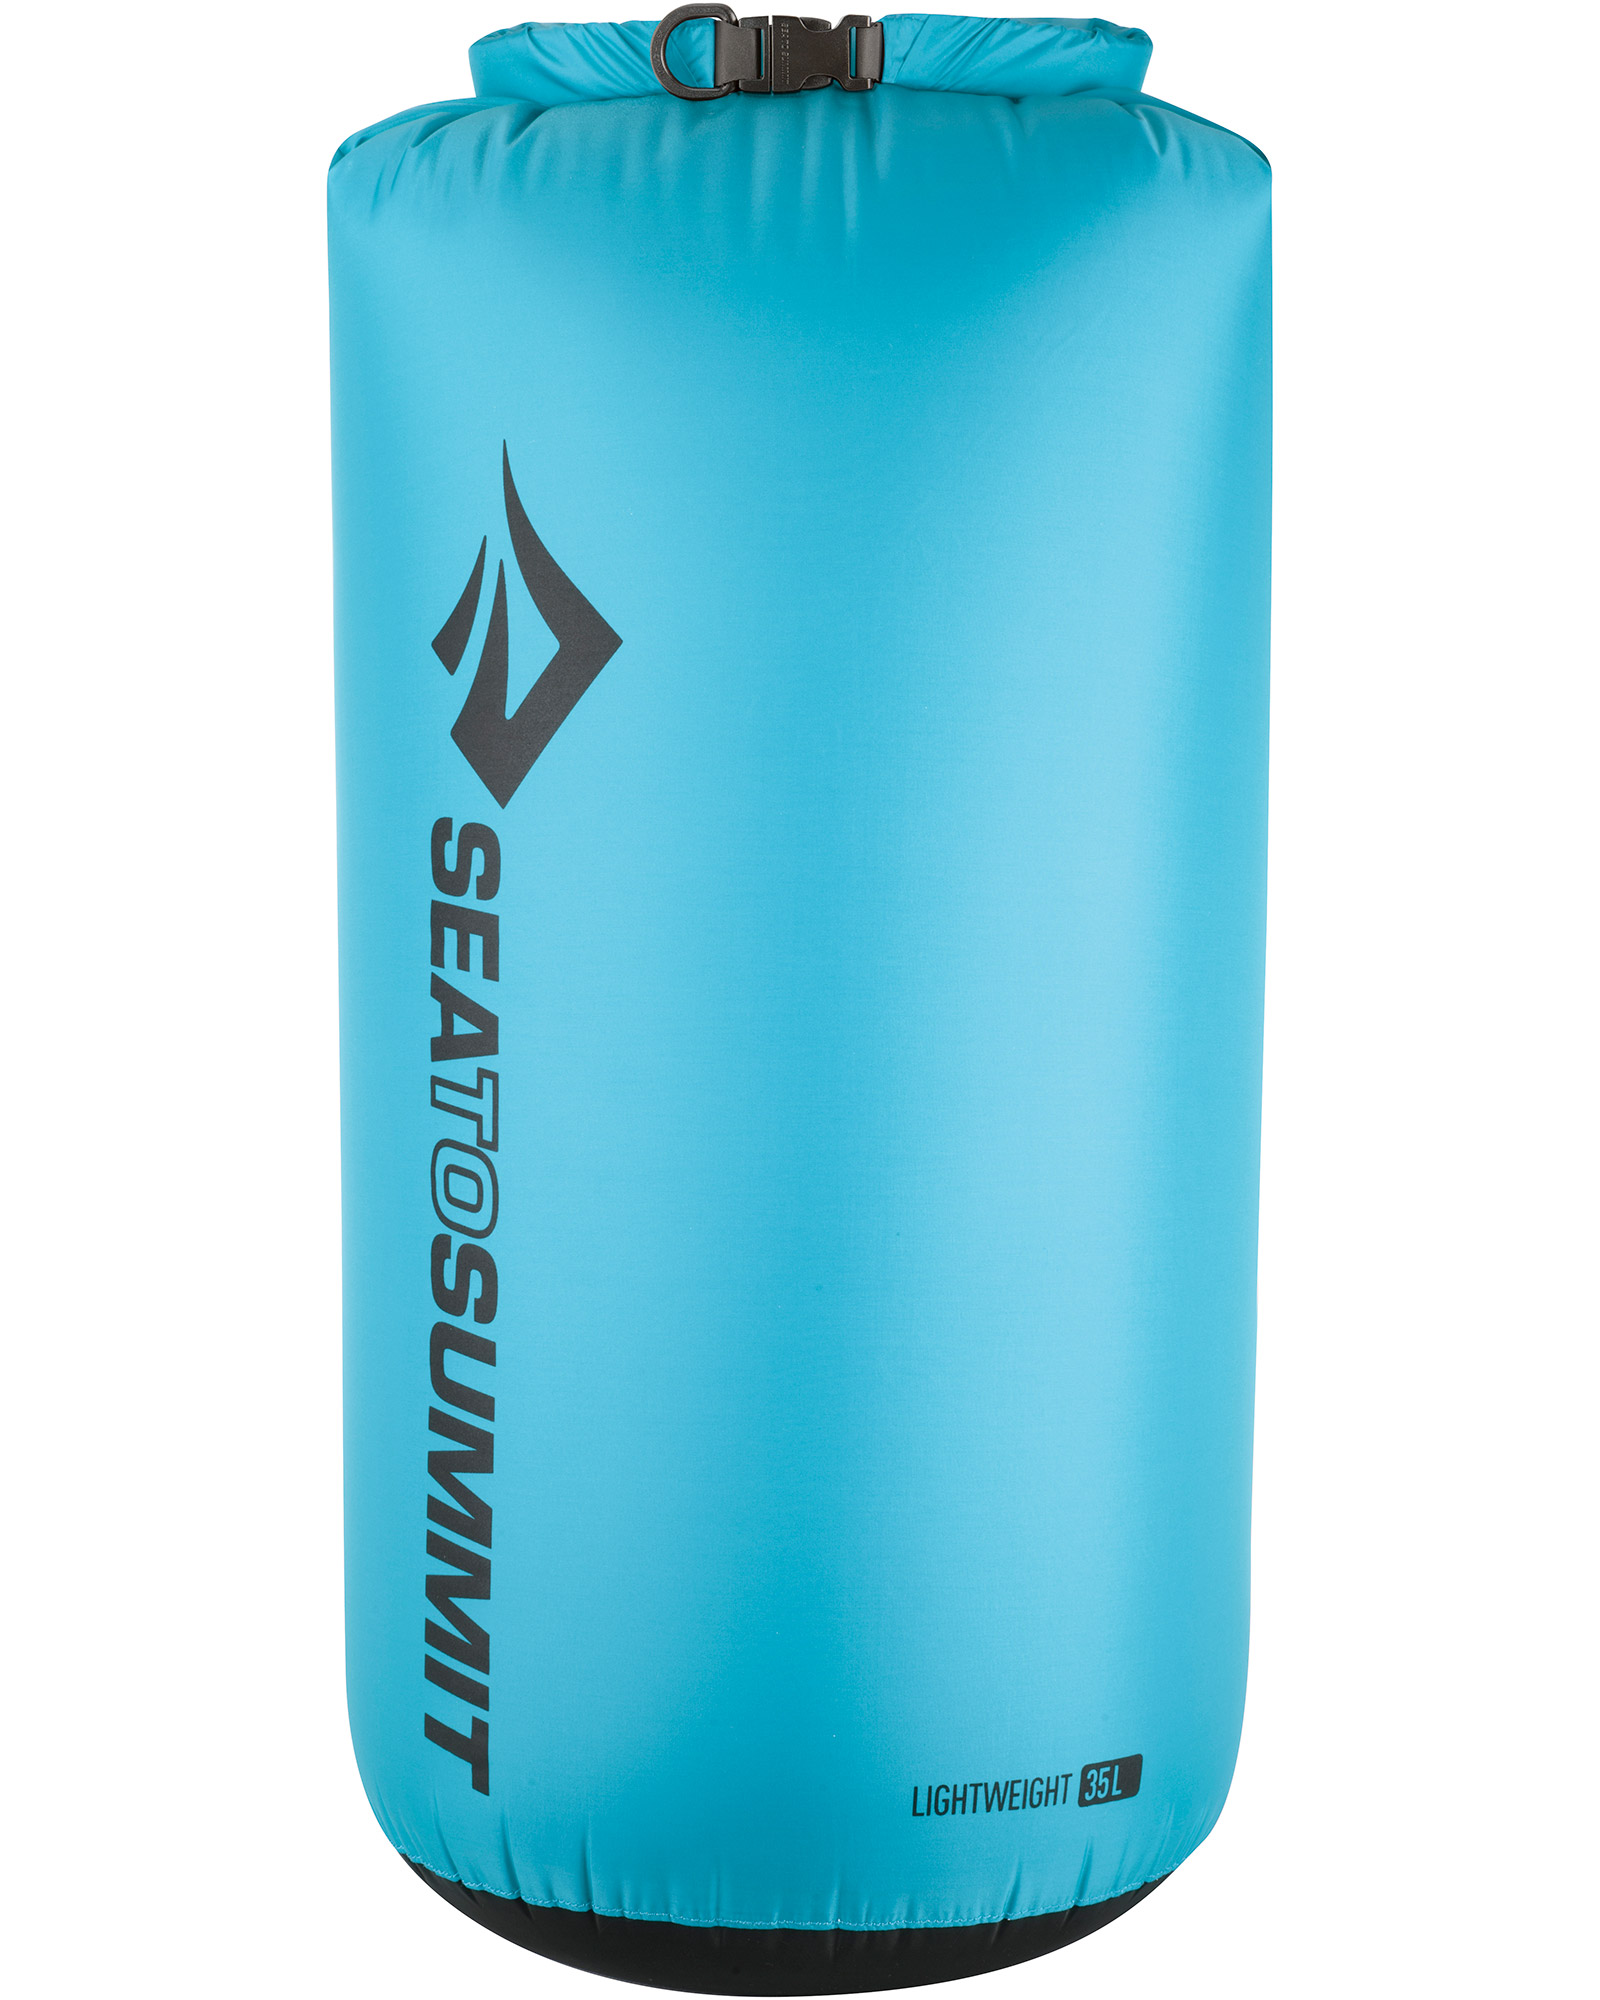 Product image of Sea to Summit Lightweight Dry Sack 35L